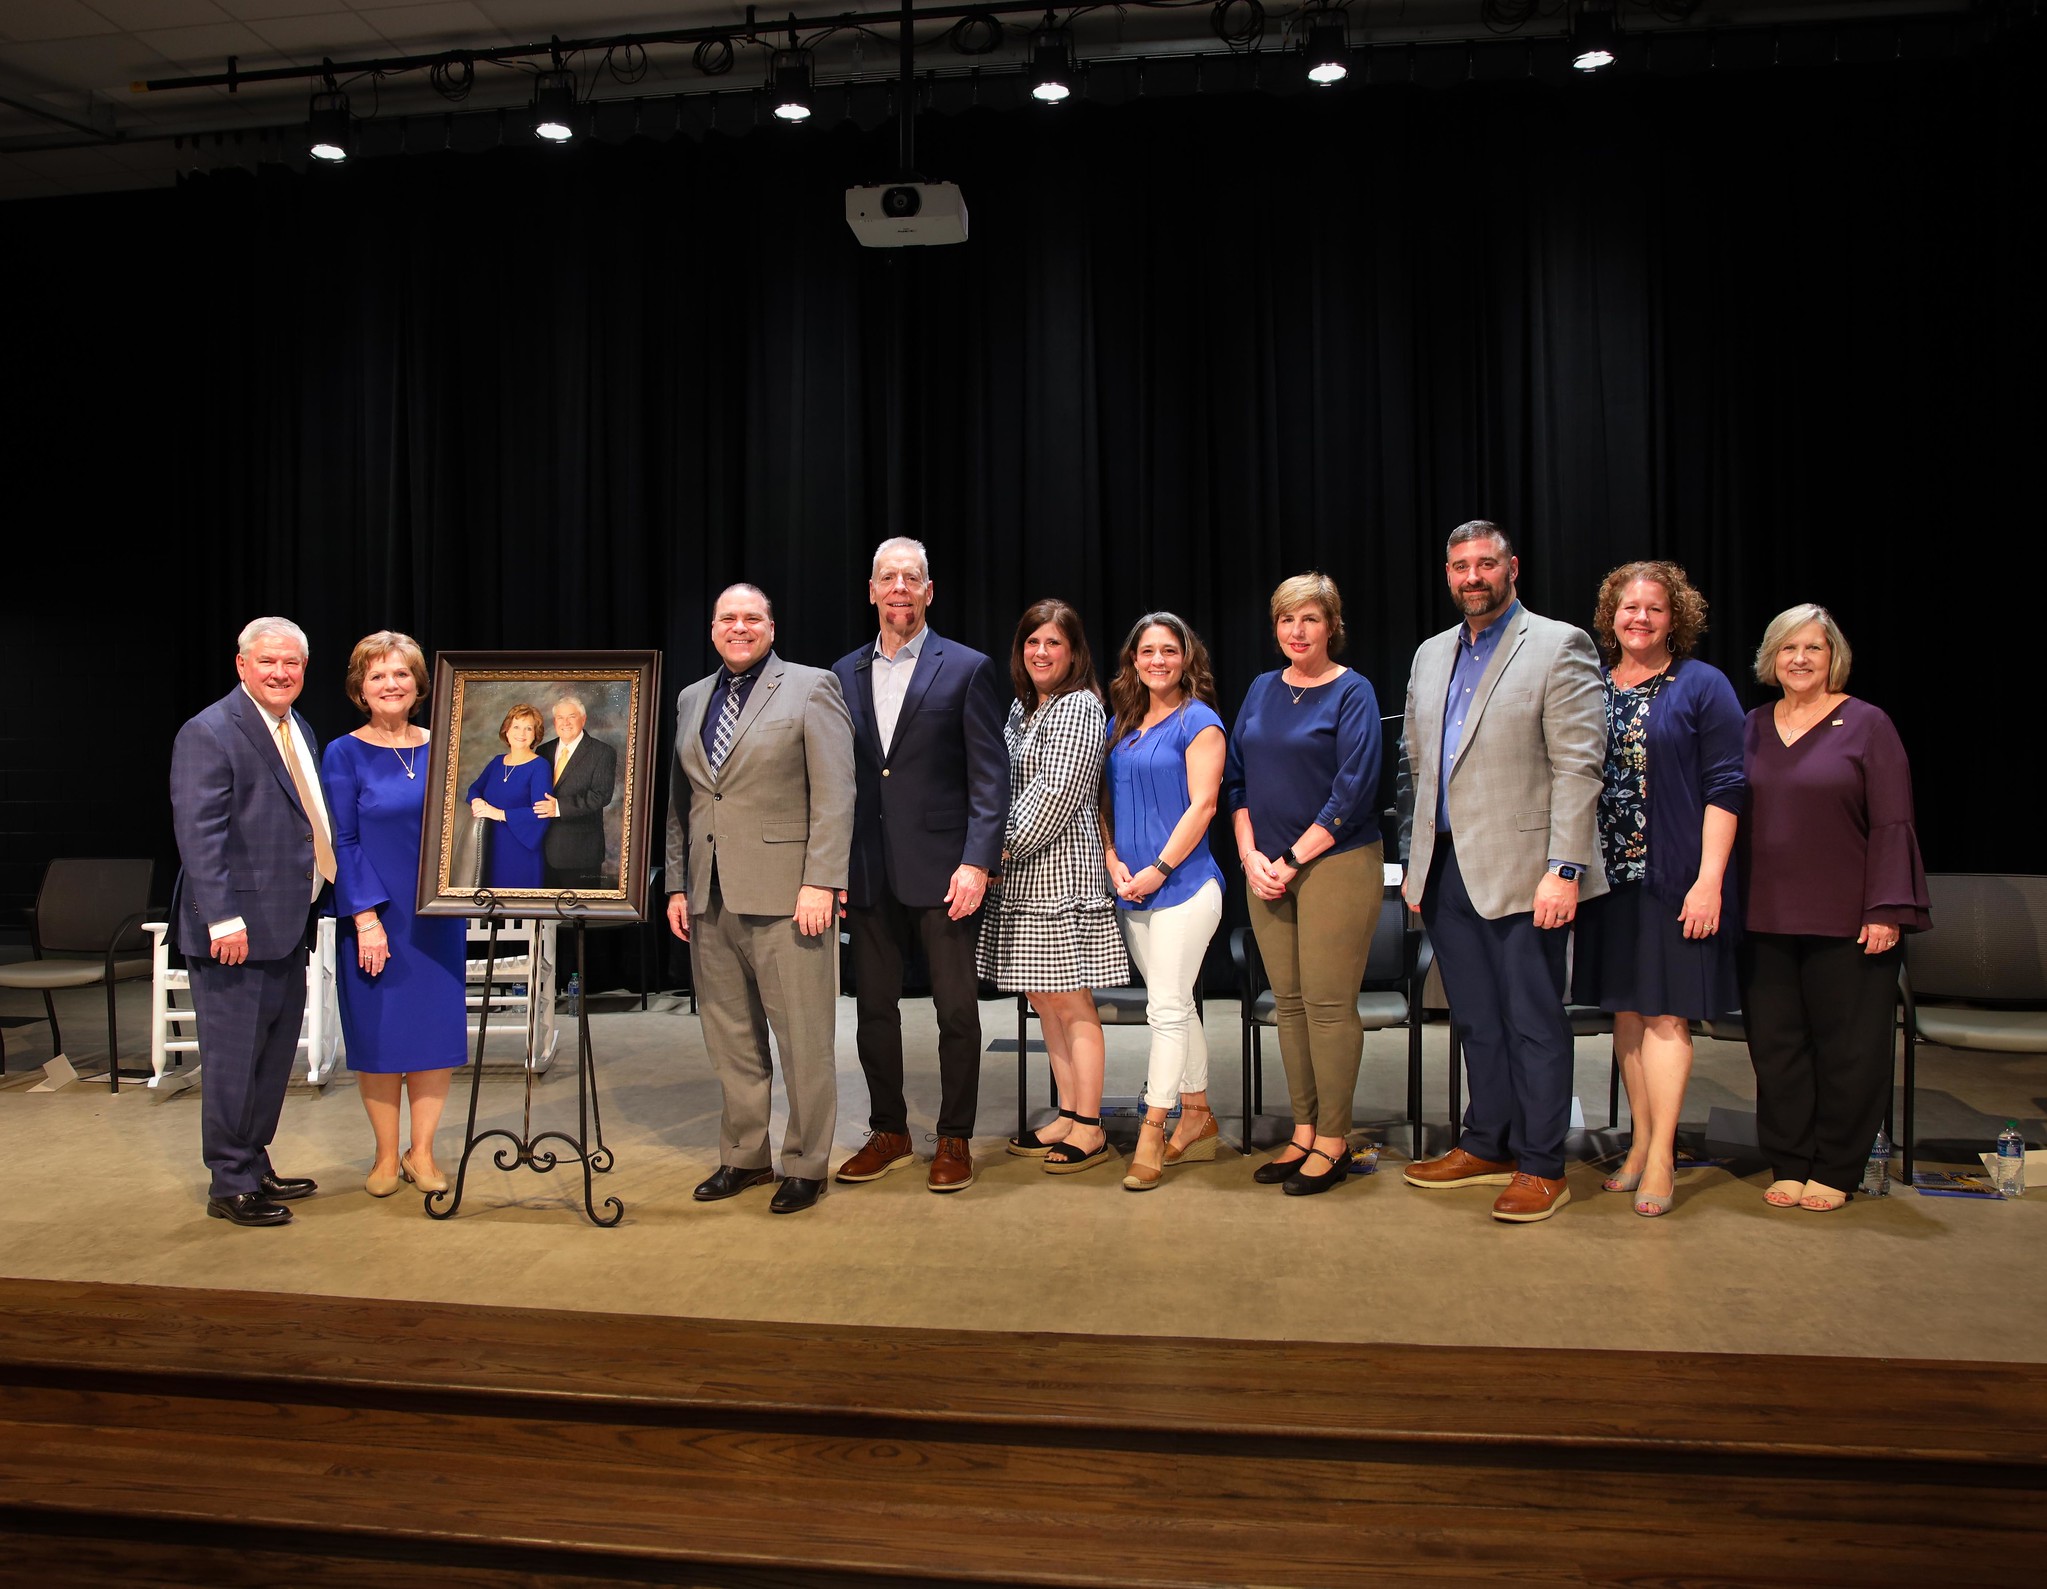 Katy ISD Honors Legacy of David and Terri Youngblood with School Dedication Ceremony